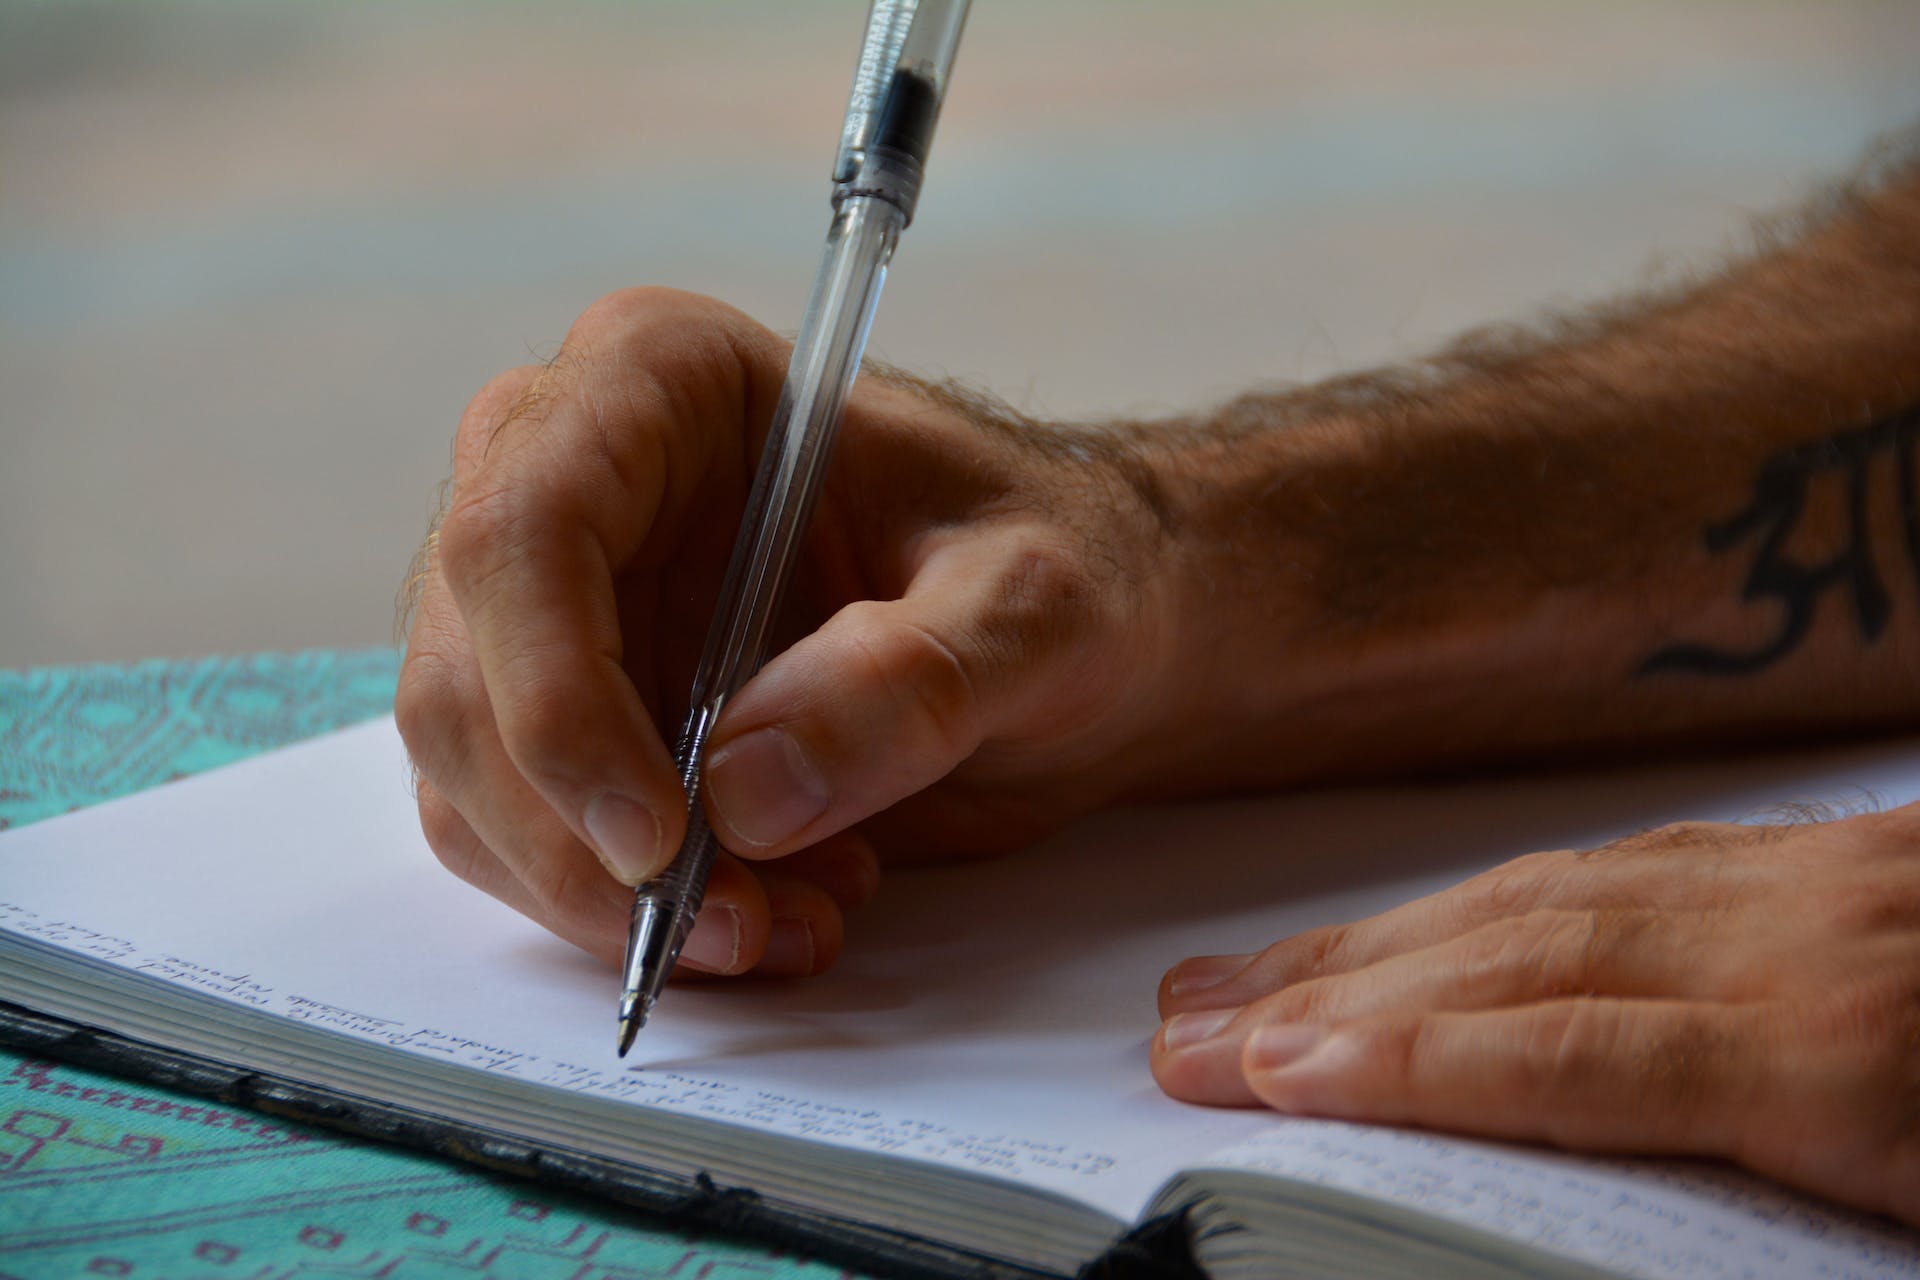 Man writing in a notebook | Source: Pexels